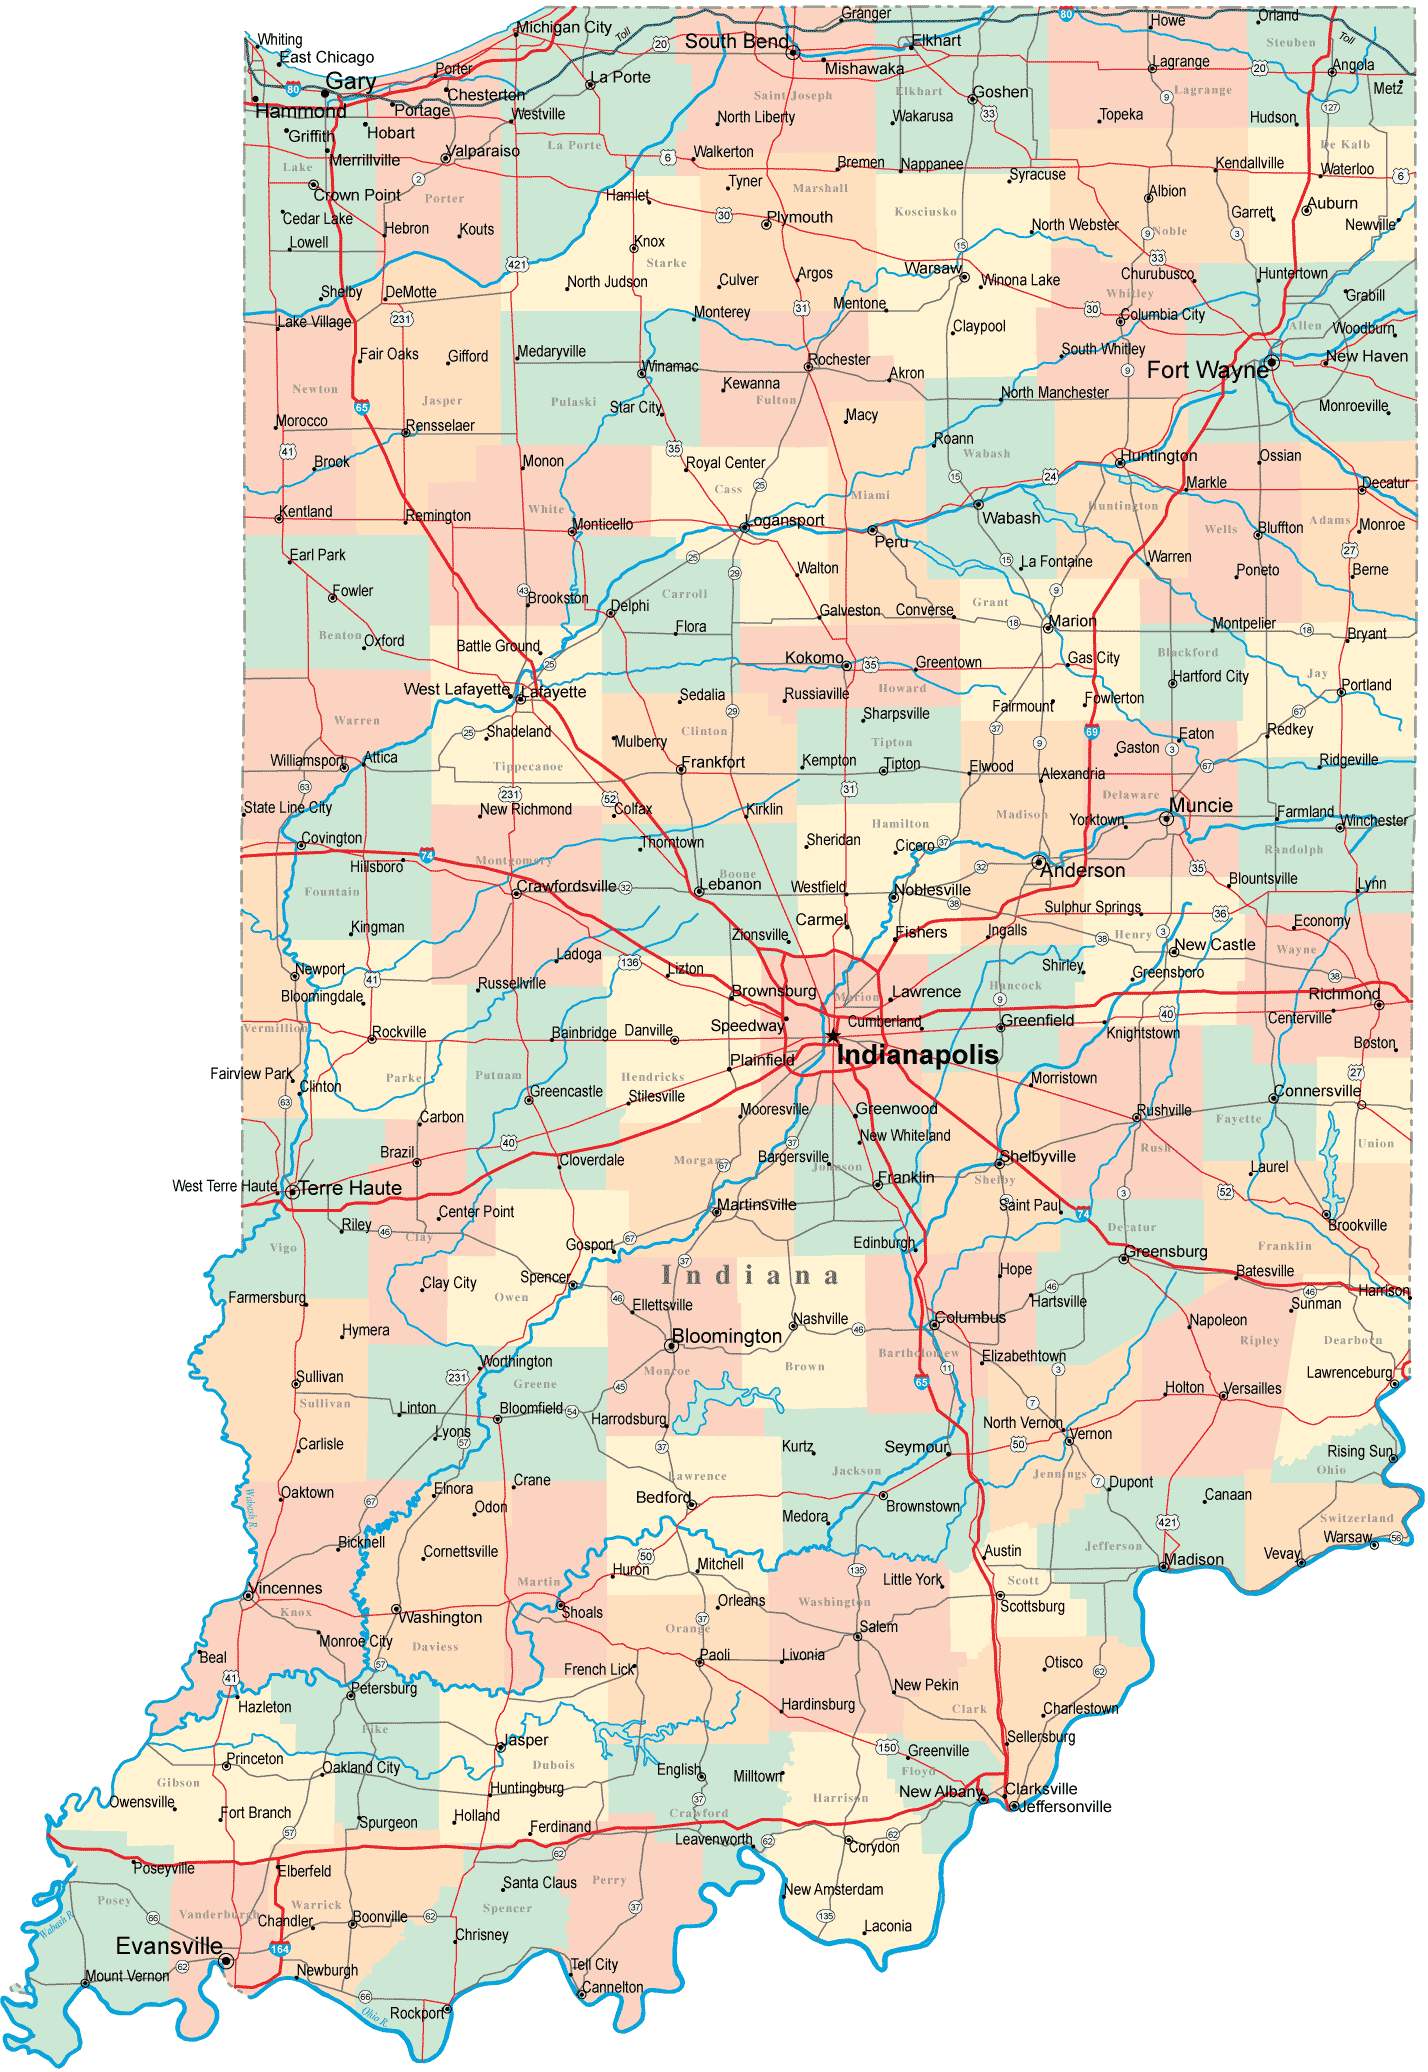 Indiana Route Map